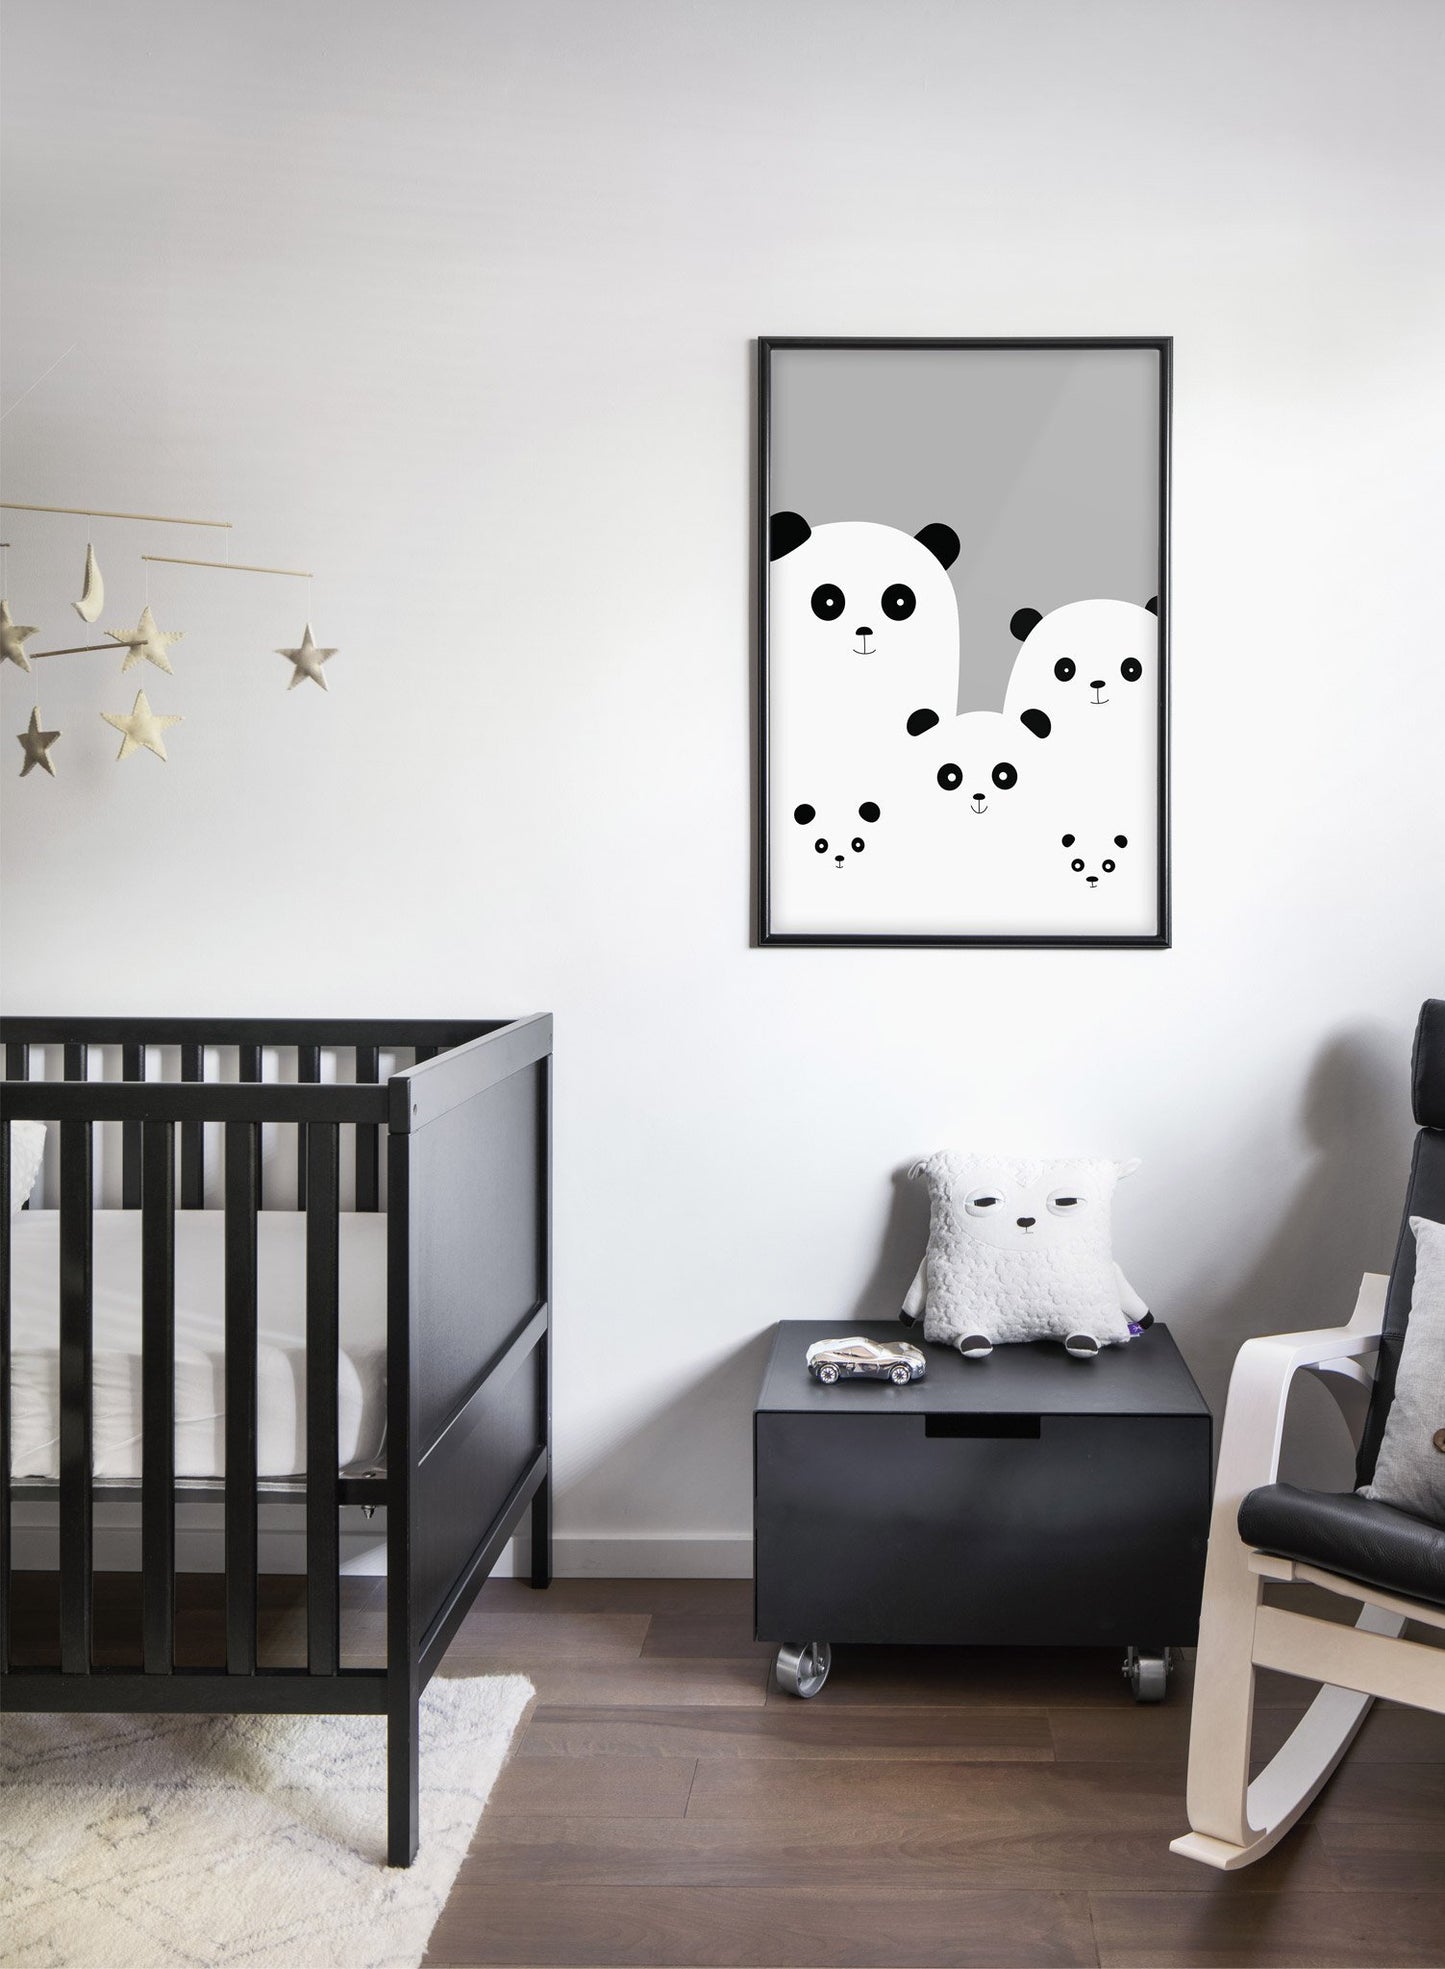 Modern minimalist poster by Opposite Wall with an illustration of a panda family in black and white - kids collection - nursery